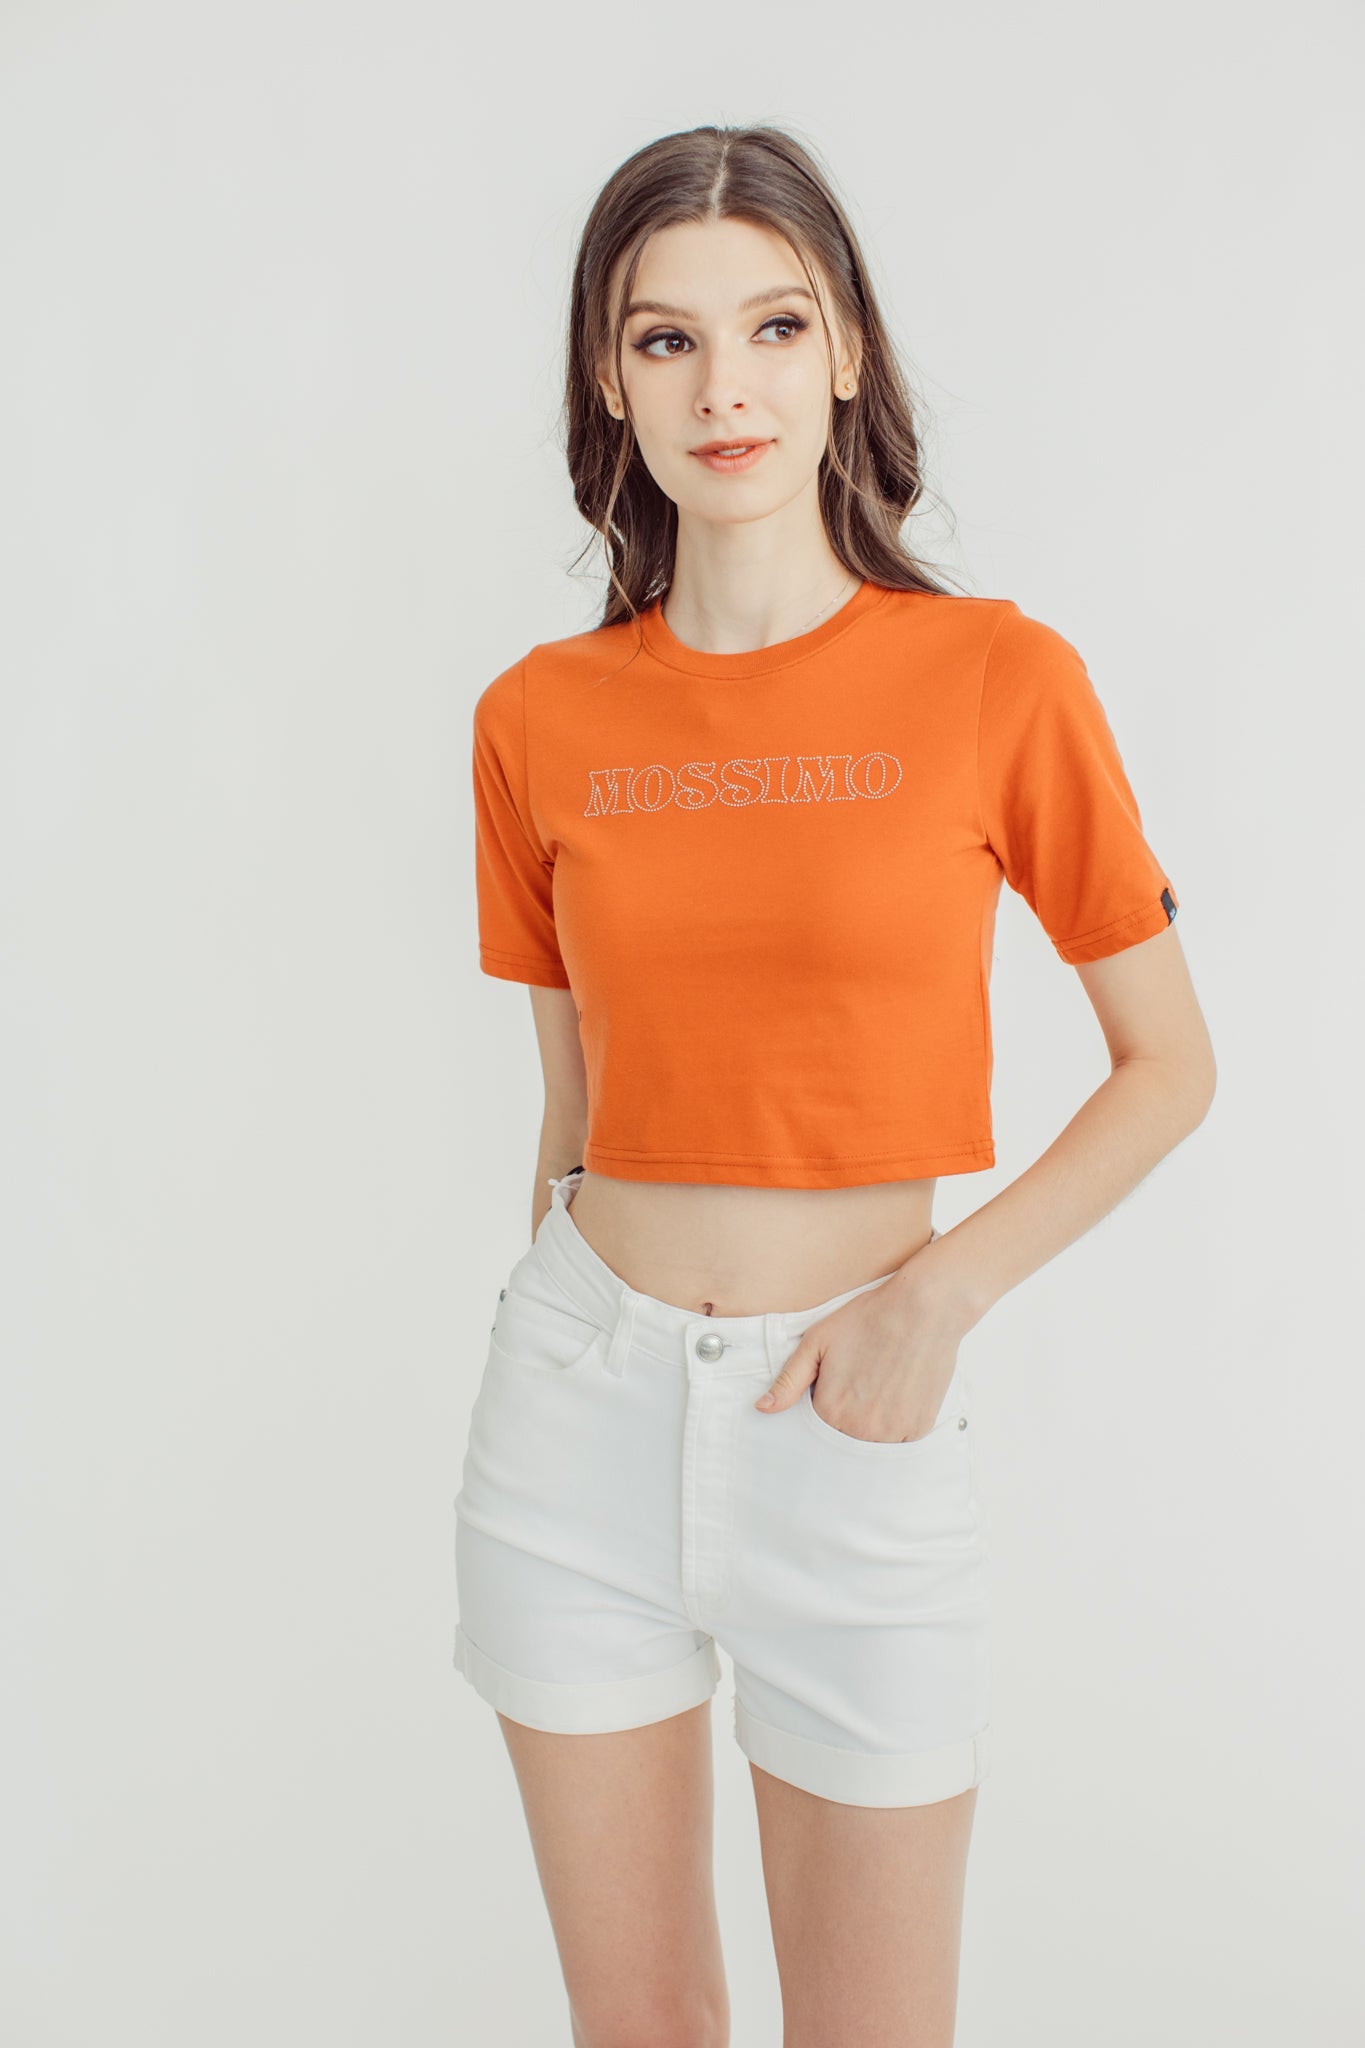 Rust with Big Branding Mossimo Silver Foil High Density Retro Cropped Fit Tee - Mossimo PH